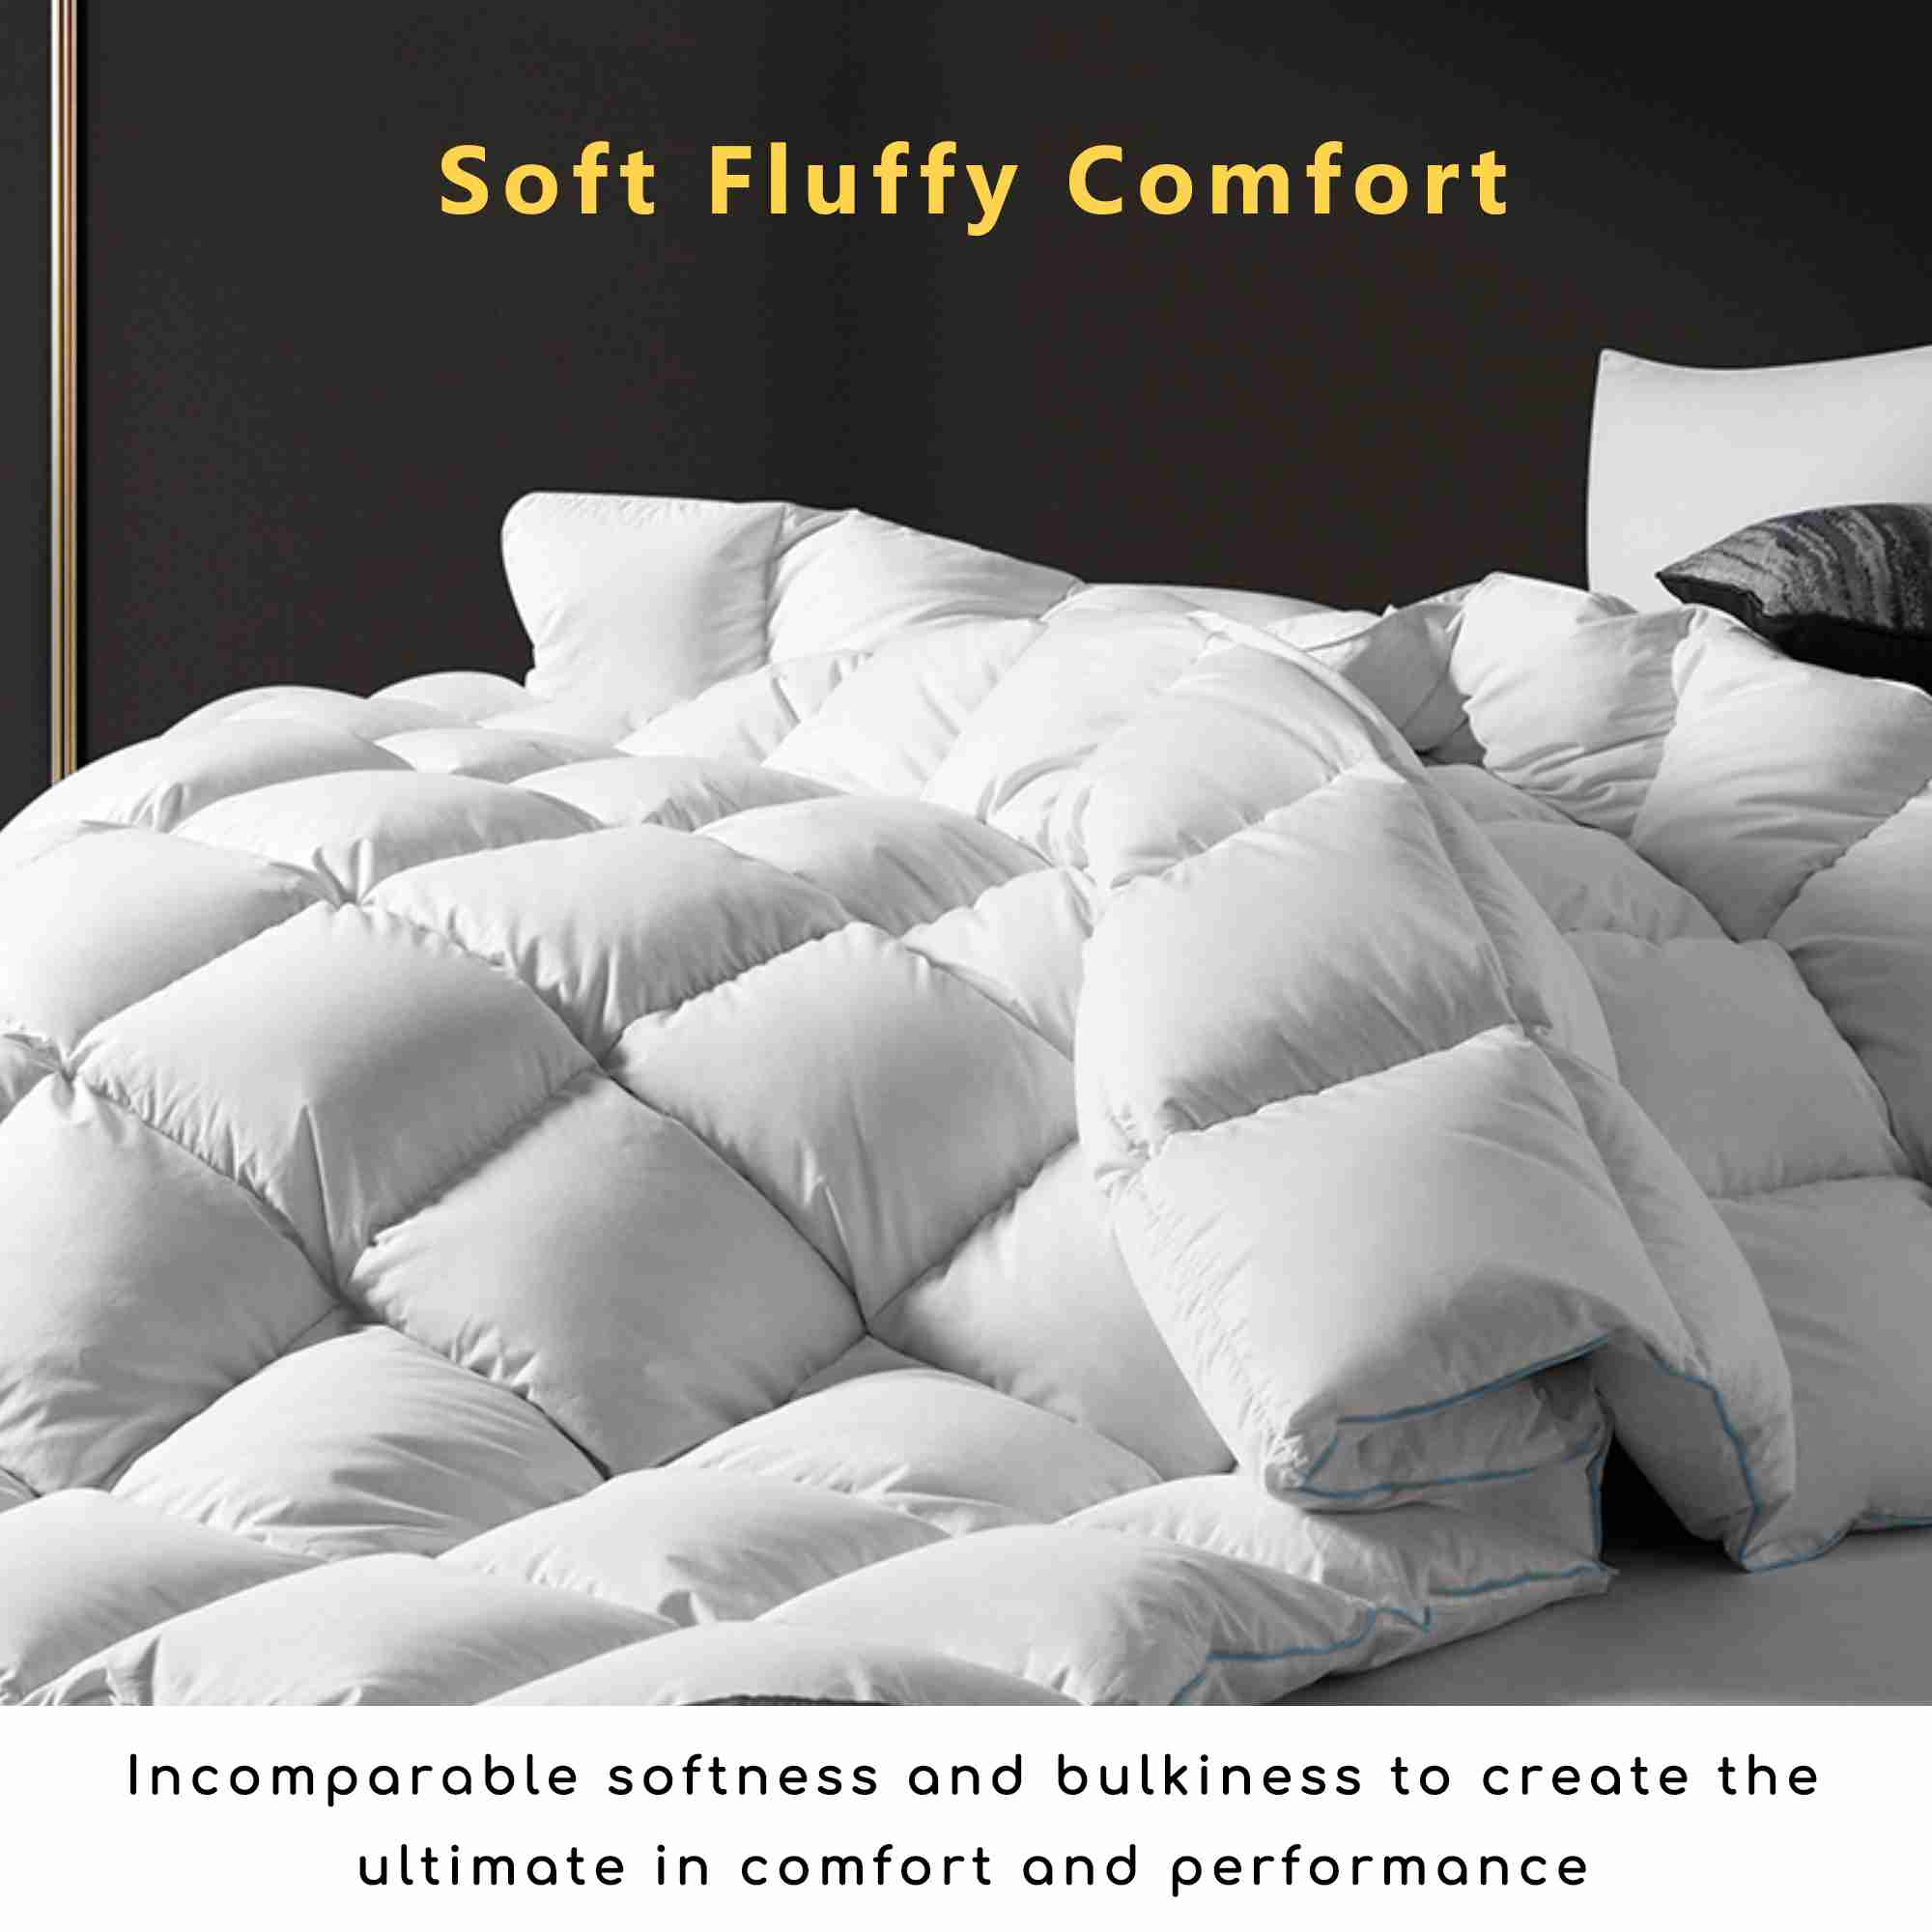 winter-warmth-down-comforter-king-size with discount code